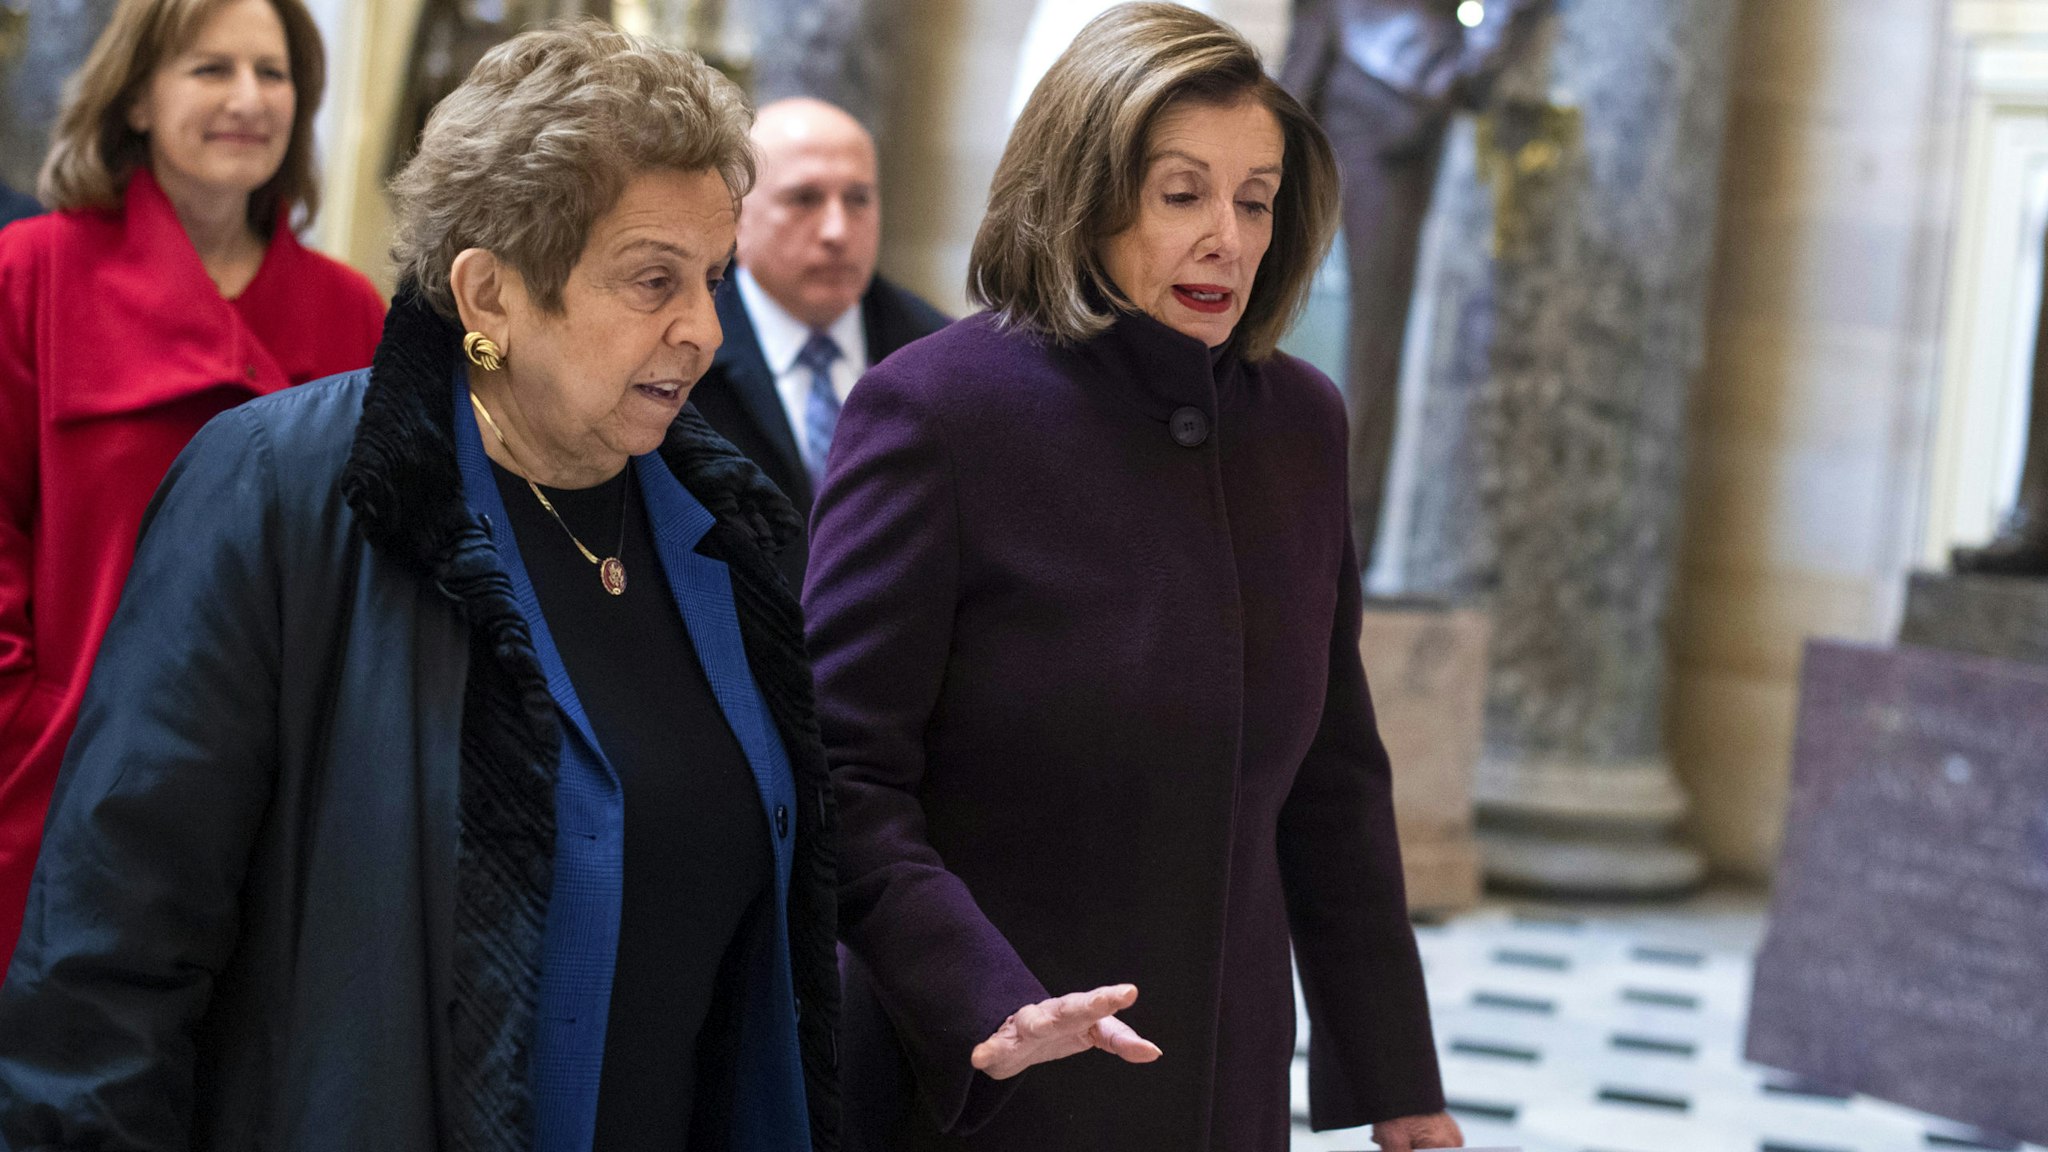 UNITED STATES - DECEMBER 12: Speaker of the House Nancy Pelosi, D-Calif., right, and Rep. Donna Shalala, D-Fla., are seen in the Capitols Statuary Hall before a rally on the Lower Drug Costs Now Act, on Thursday, December 12, 2019.